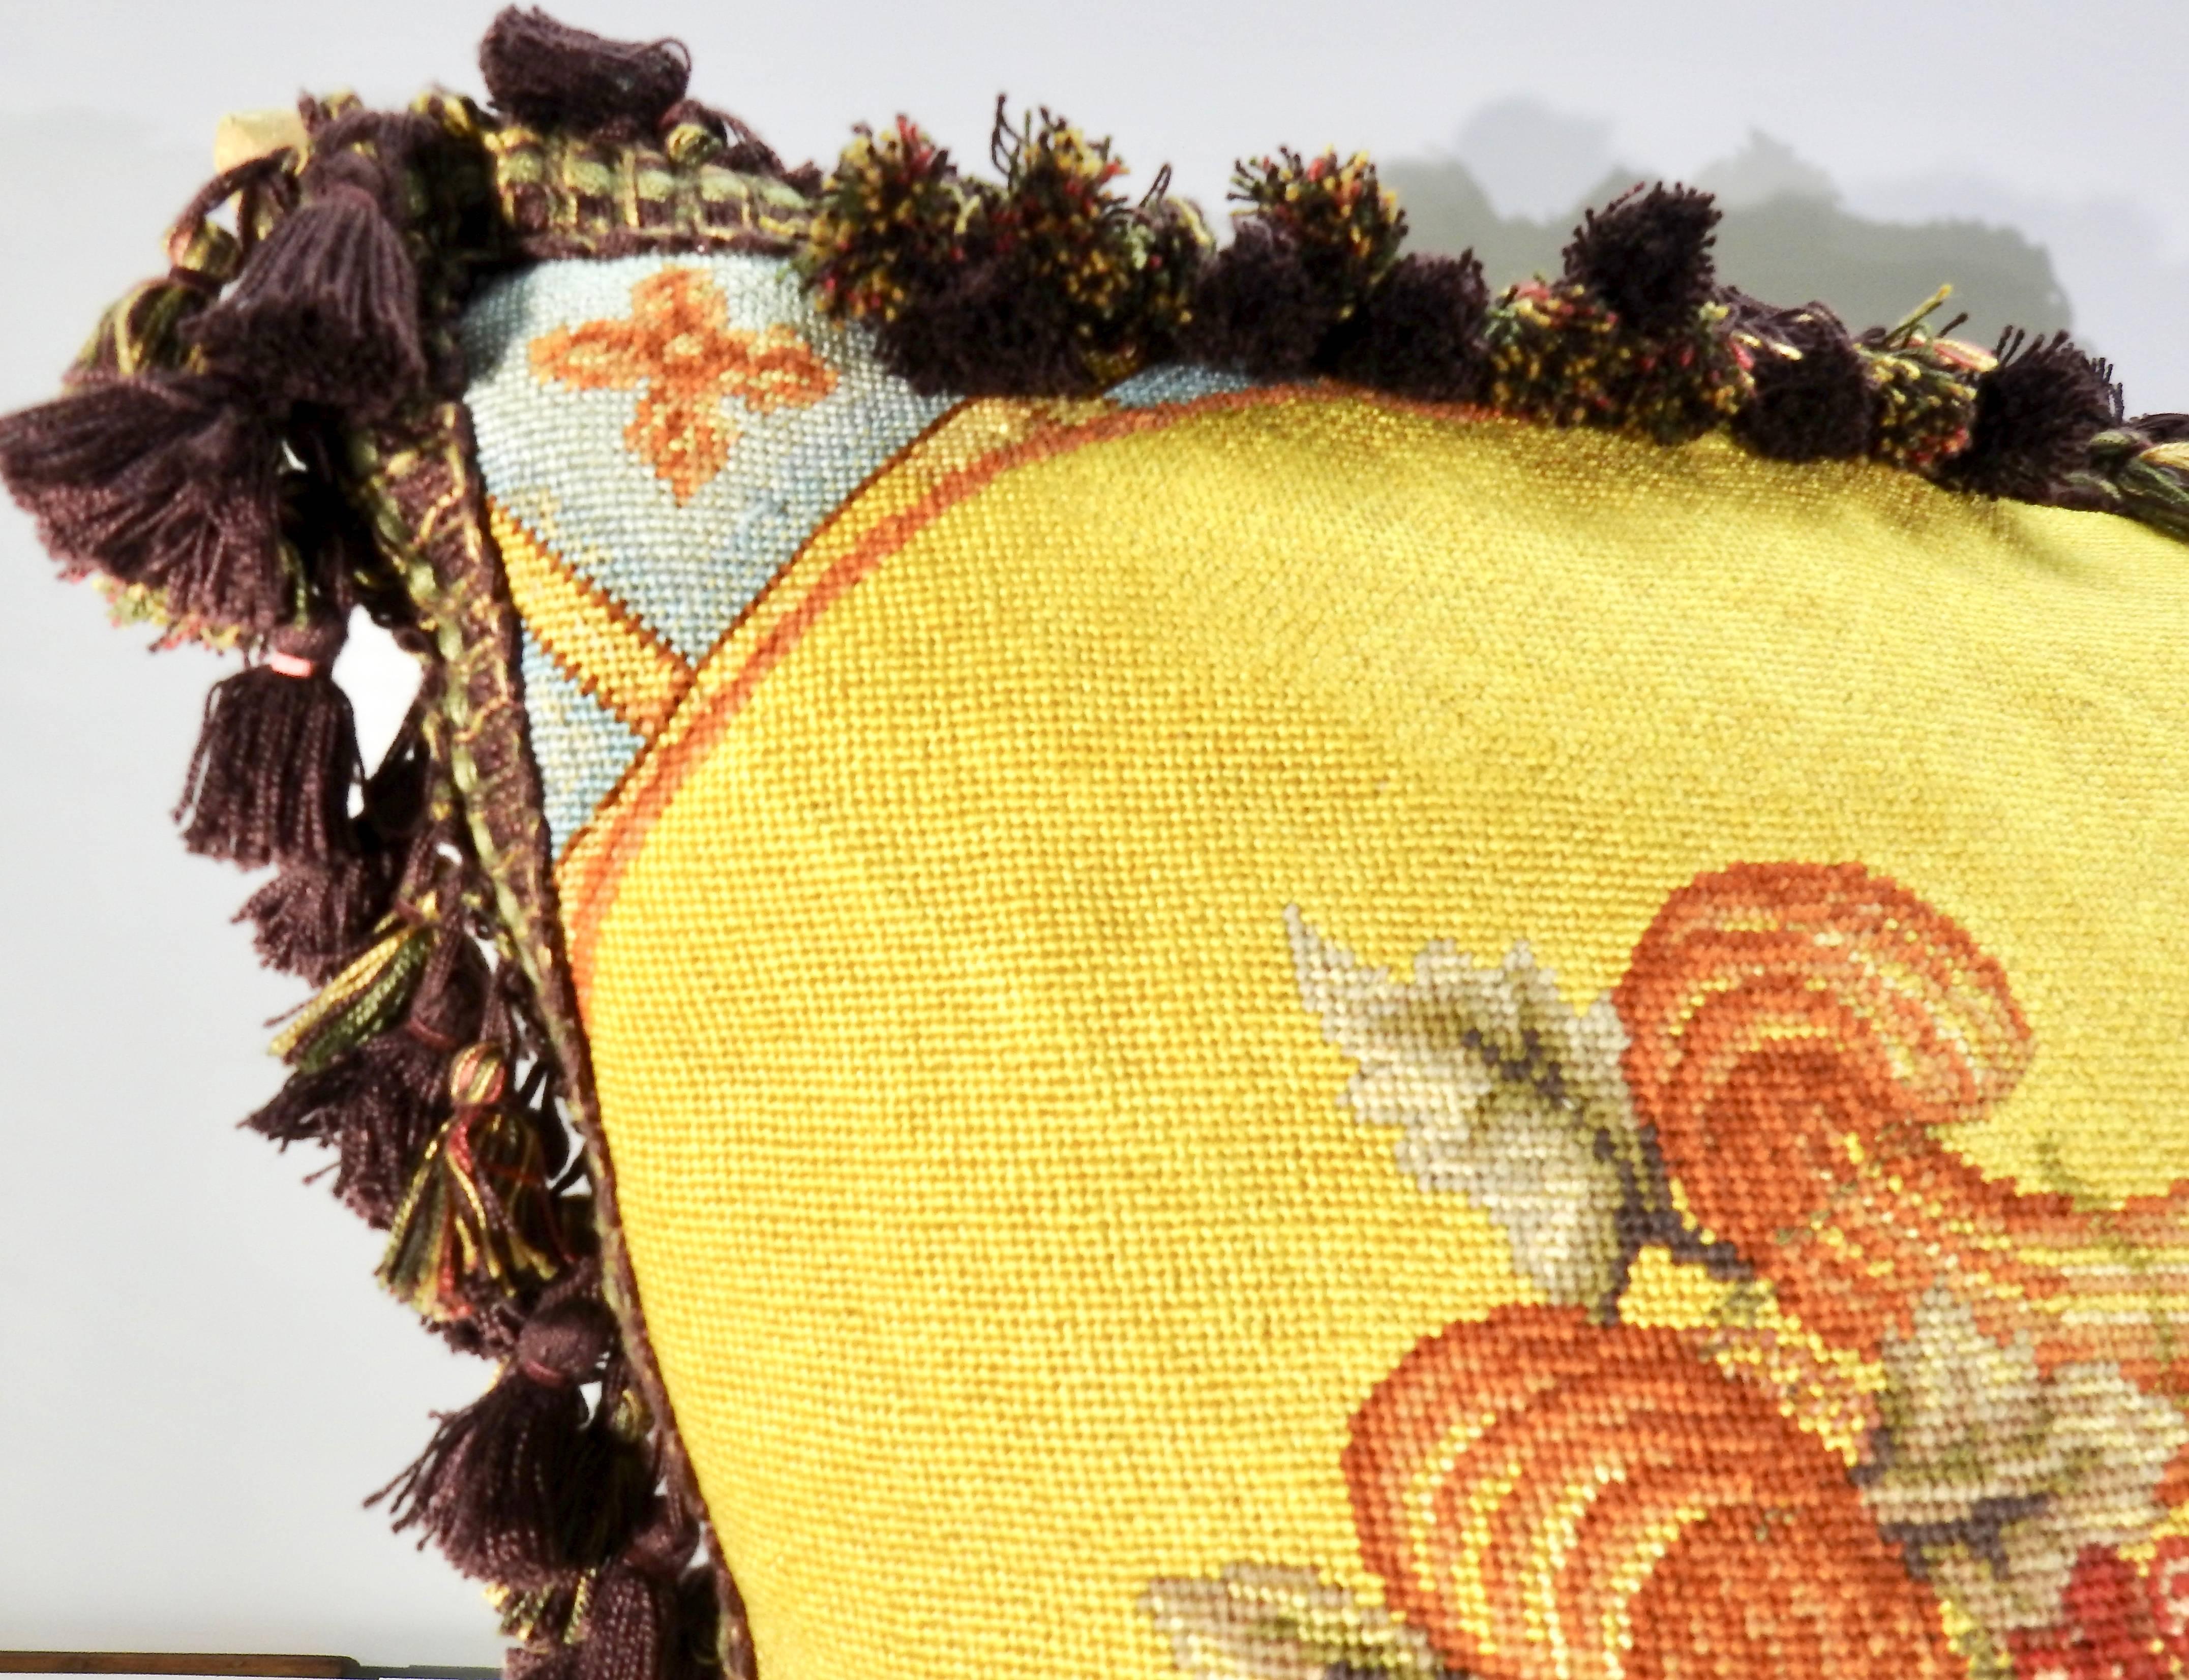 A fruit bowl takes center stage on this vintage needlepoint pillow with swirls of fruit surrounding it. The background is completed in a bold yellow with a variety of colors in the design. The back of the pillow is a soft, tan colored fabric with a